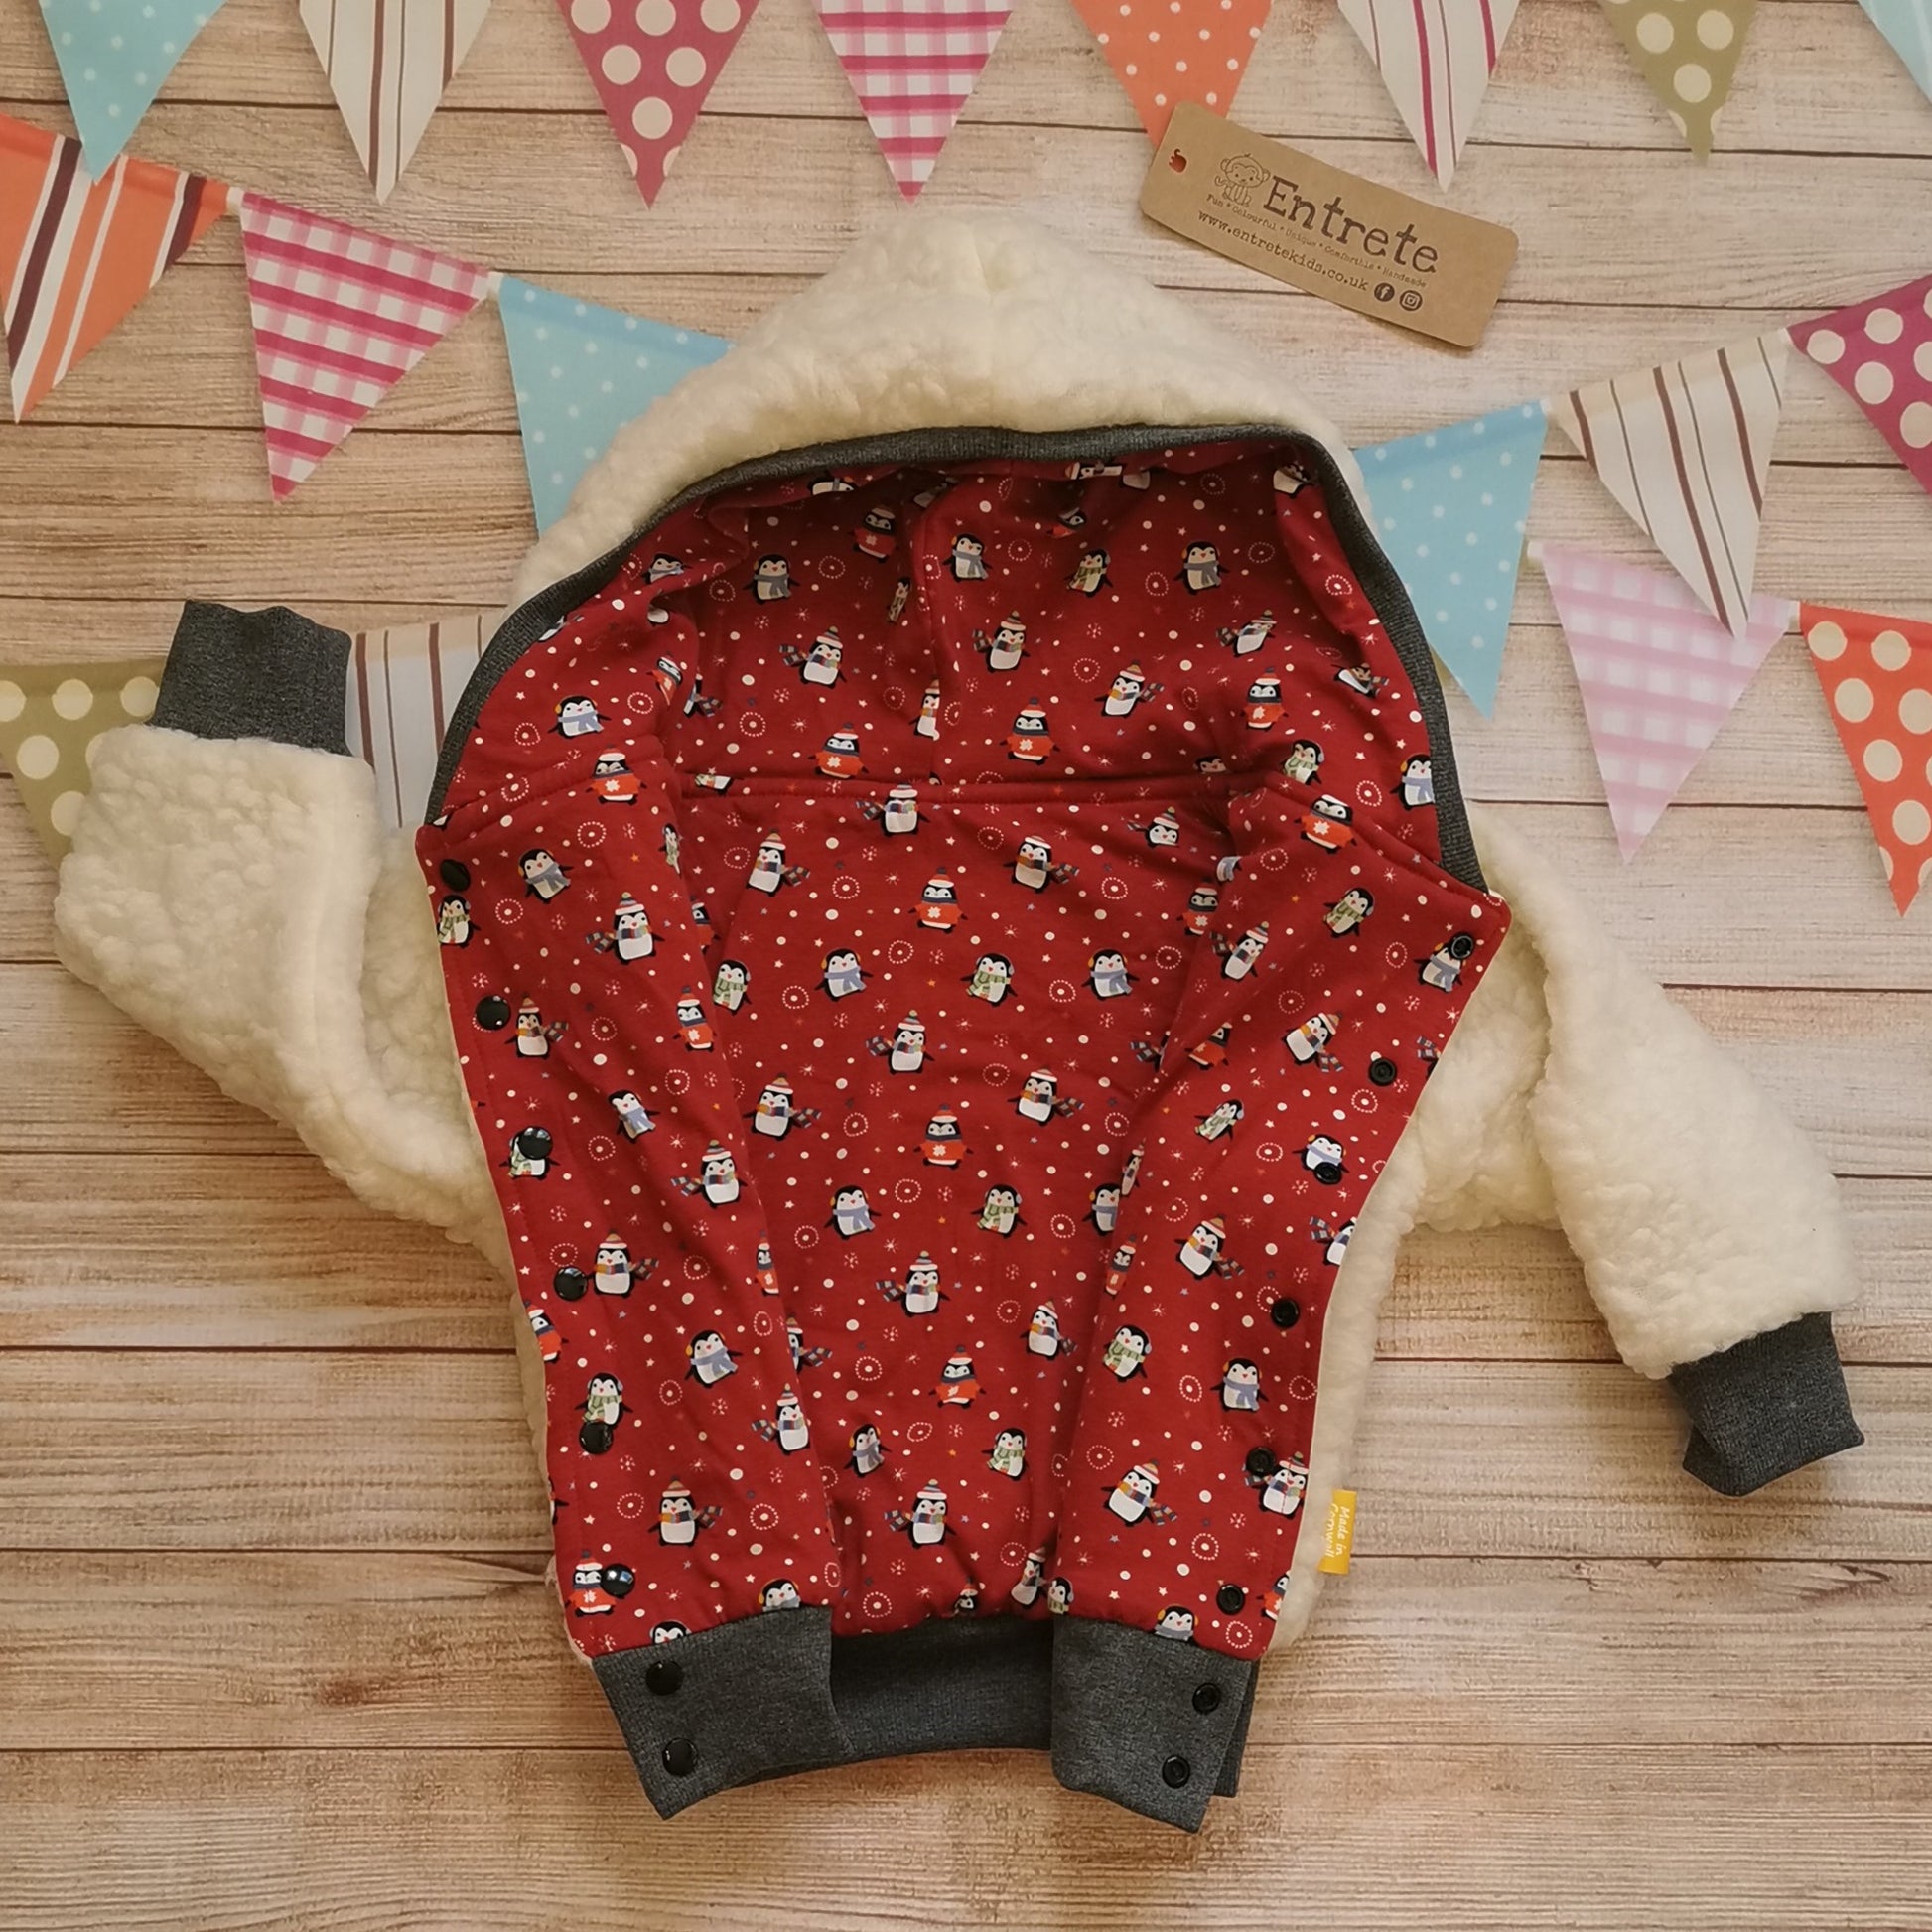 The festive and fun red christmas penguins hoodie, with warm sherpa fur. Shown open to reveal both sides.